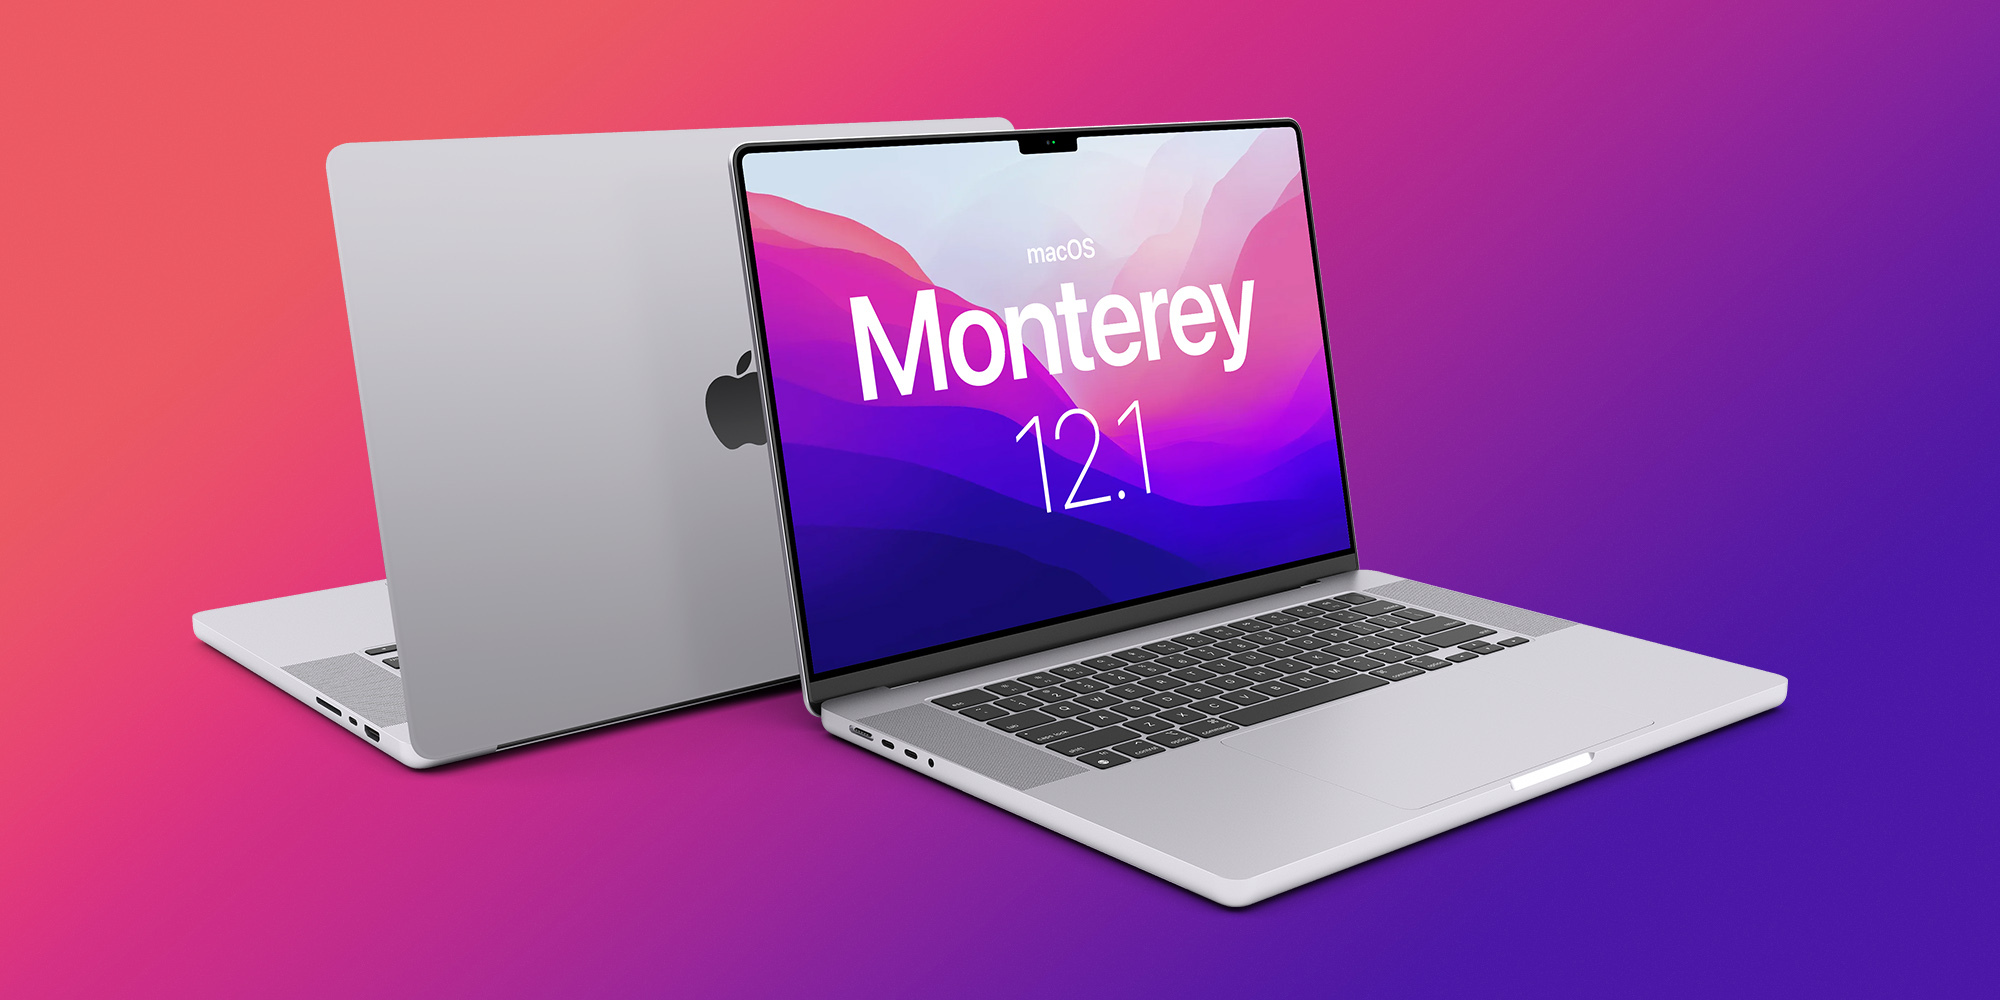 Apple updates macOS Monterey with SharePlay, MagSafe charging fix